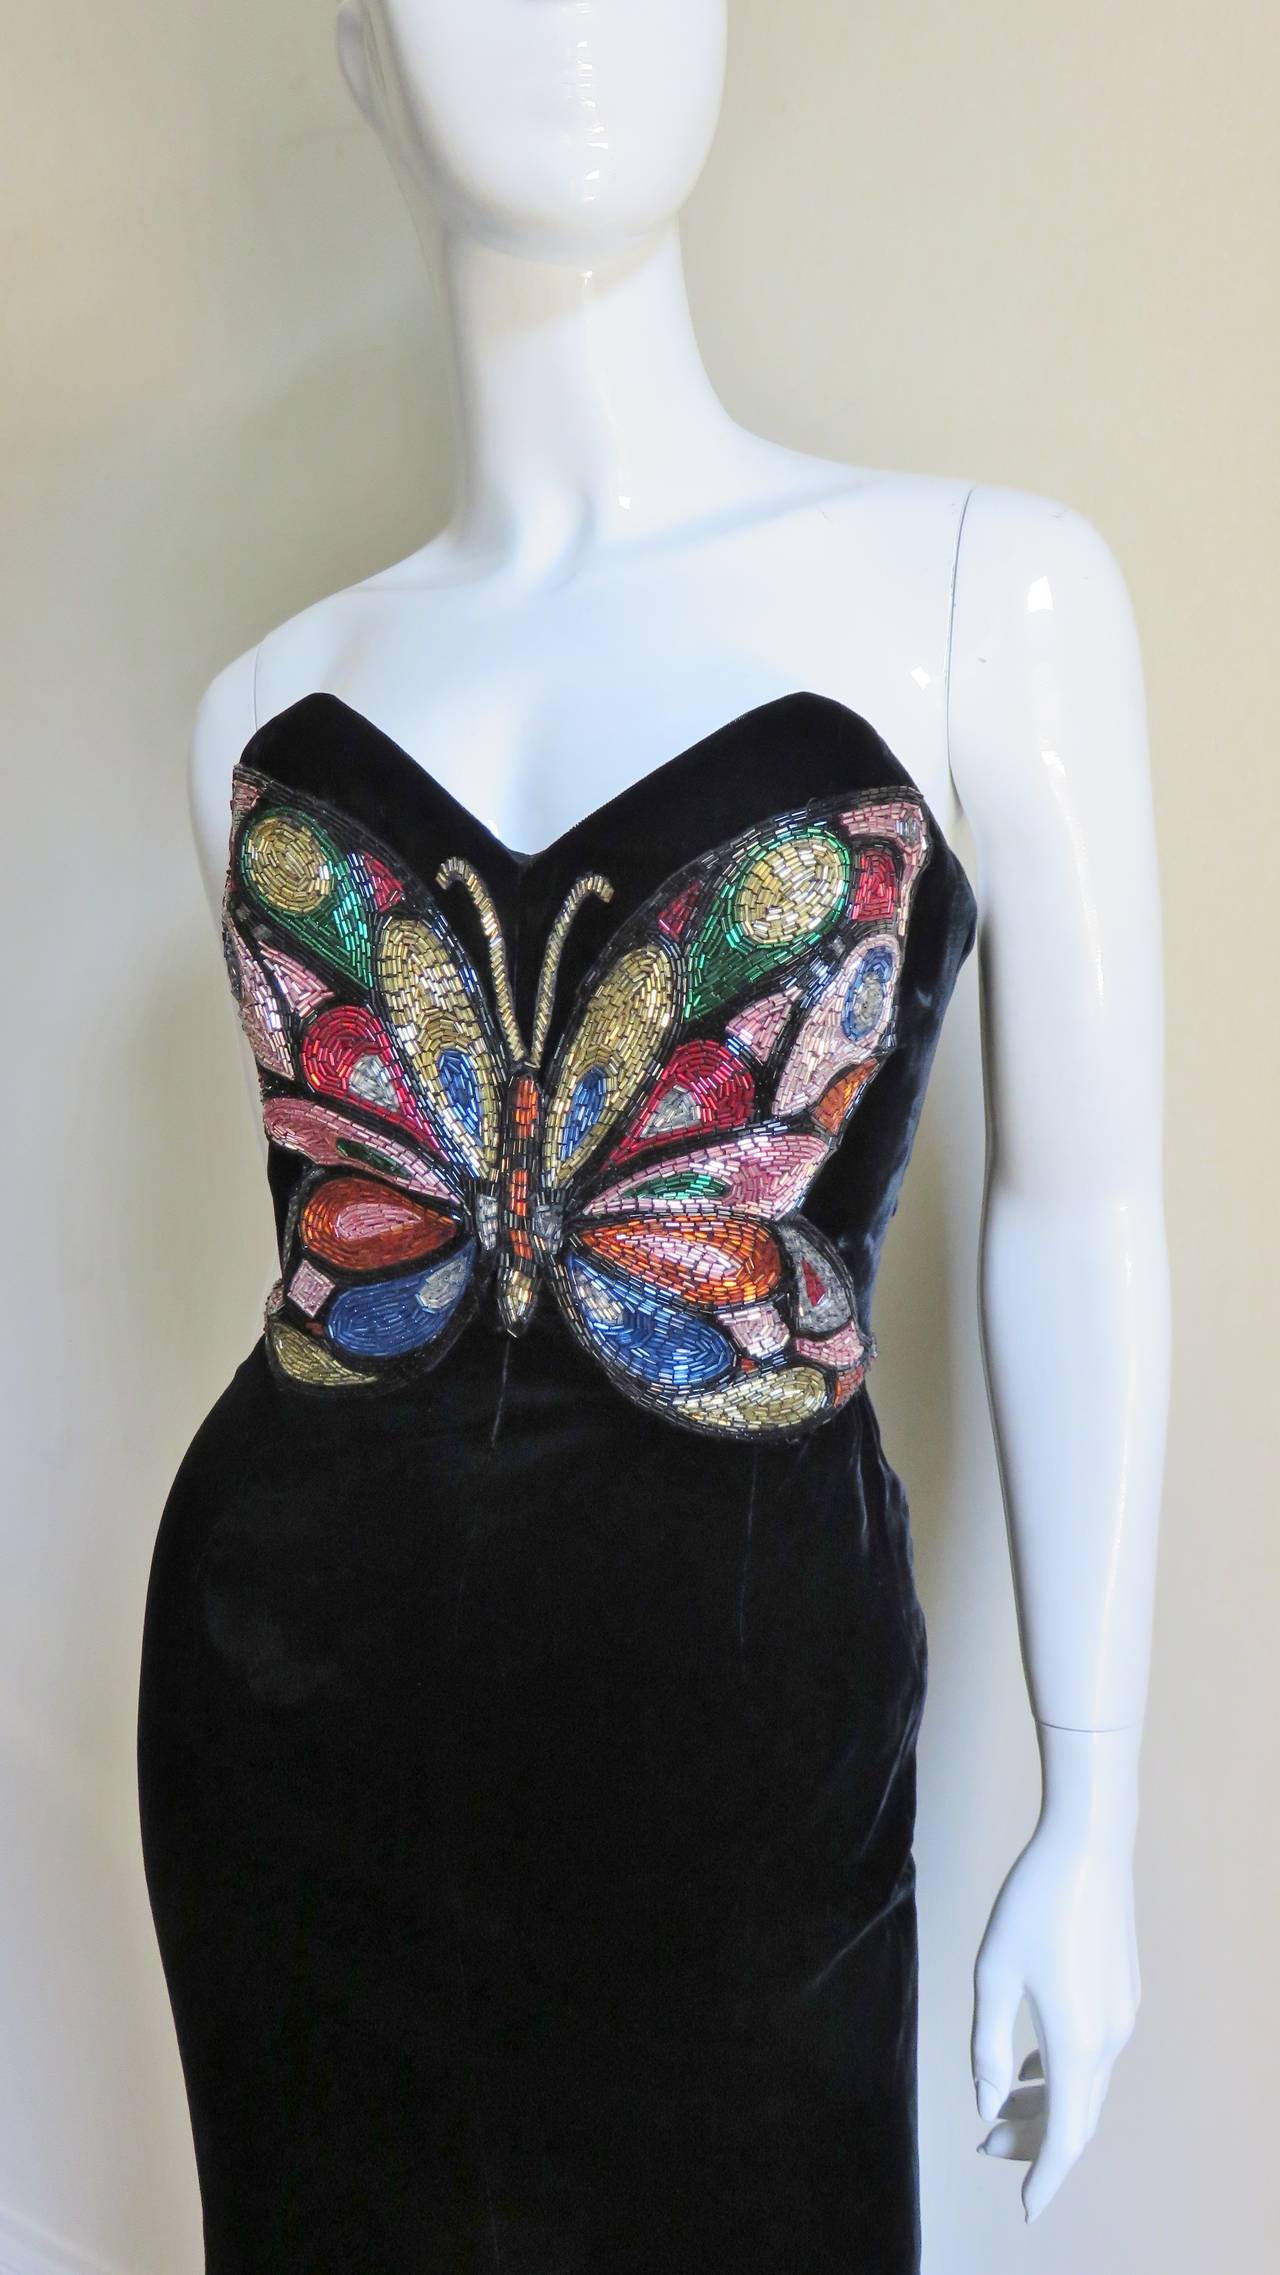 An incredible rich black silk velvet bustier dress from Oscar de la Renta with a fabulous, colorful, intricately glass beaded butterfly on the front bodice.  It is strapless, fitted through the waist to the thighs then flares in a mermaid style to